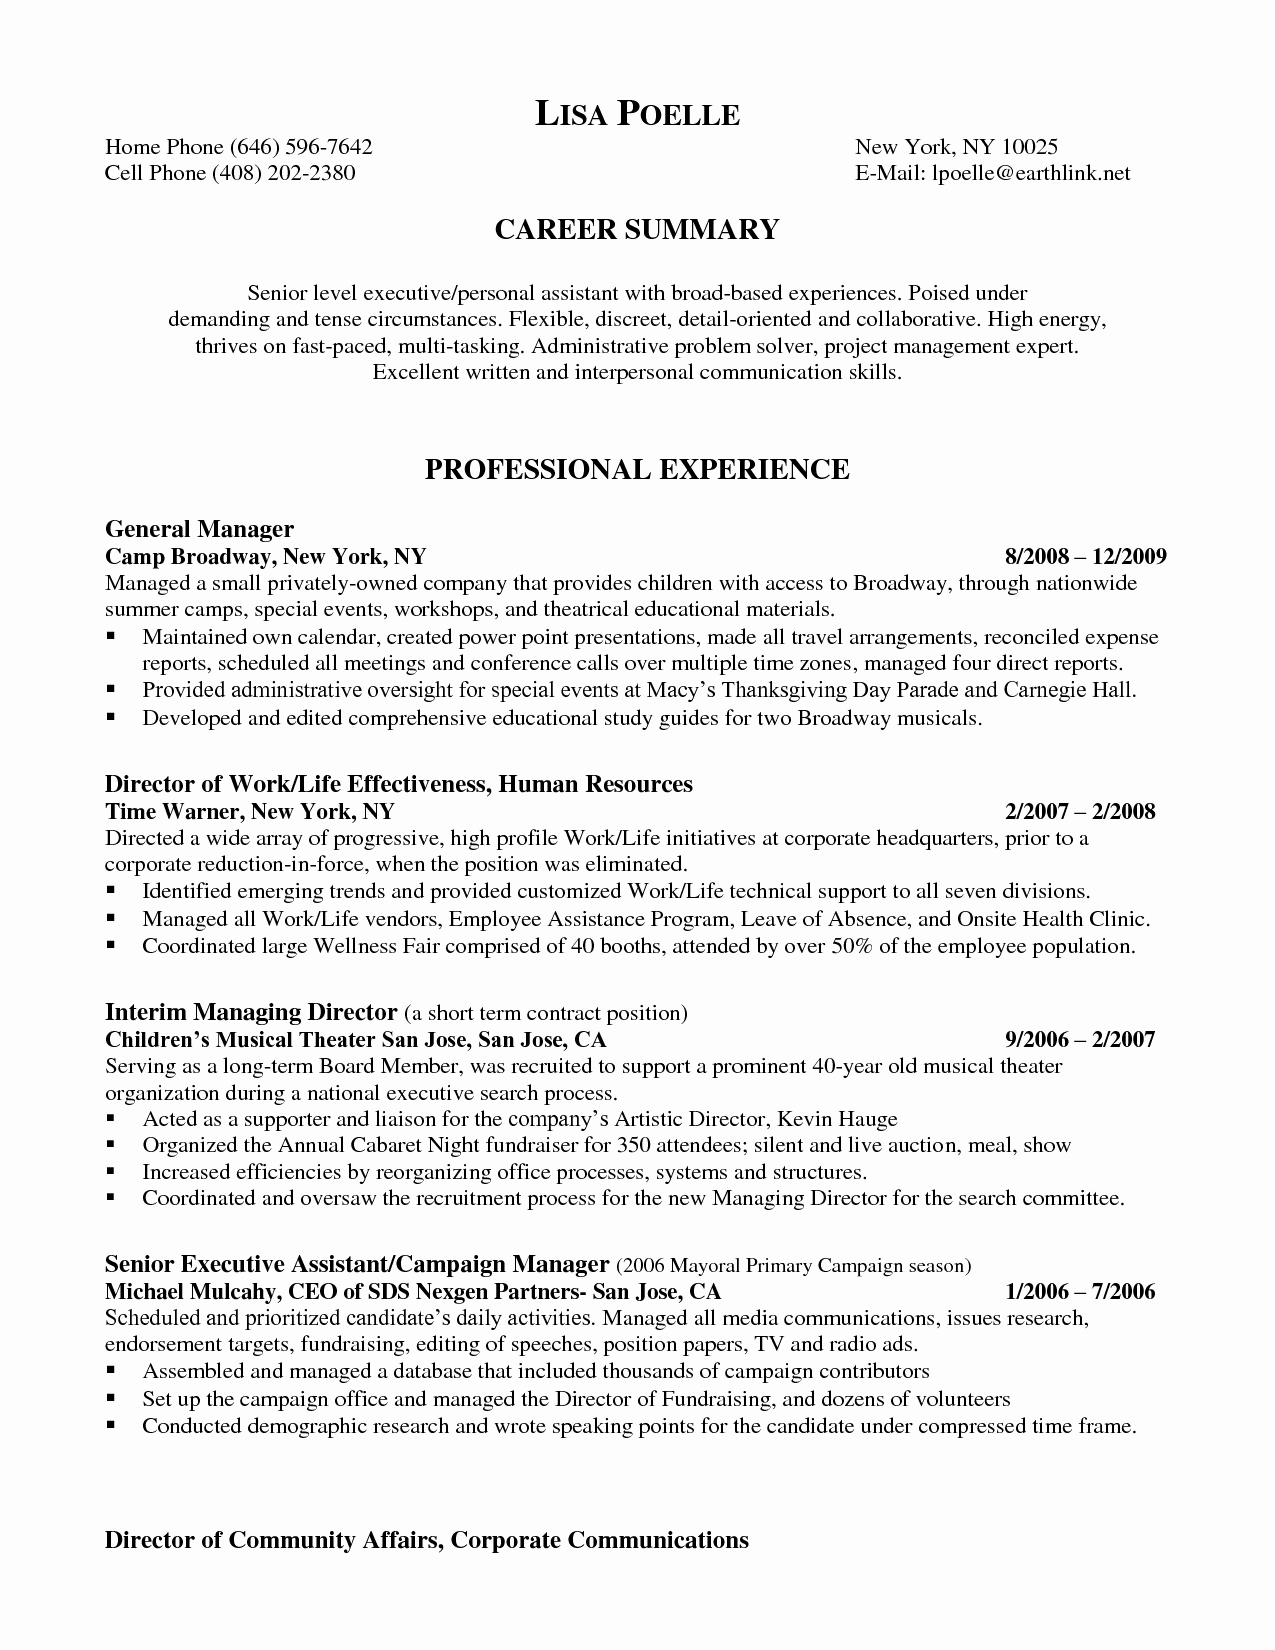 Executive assistant to Ceo Resume Sample Resume Ideas